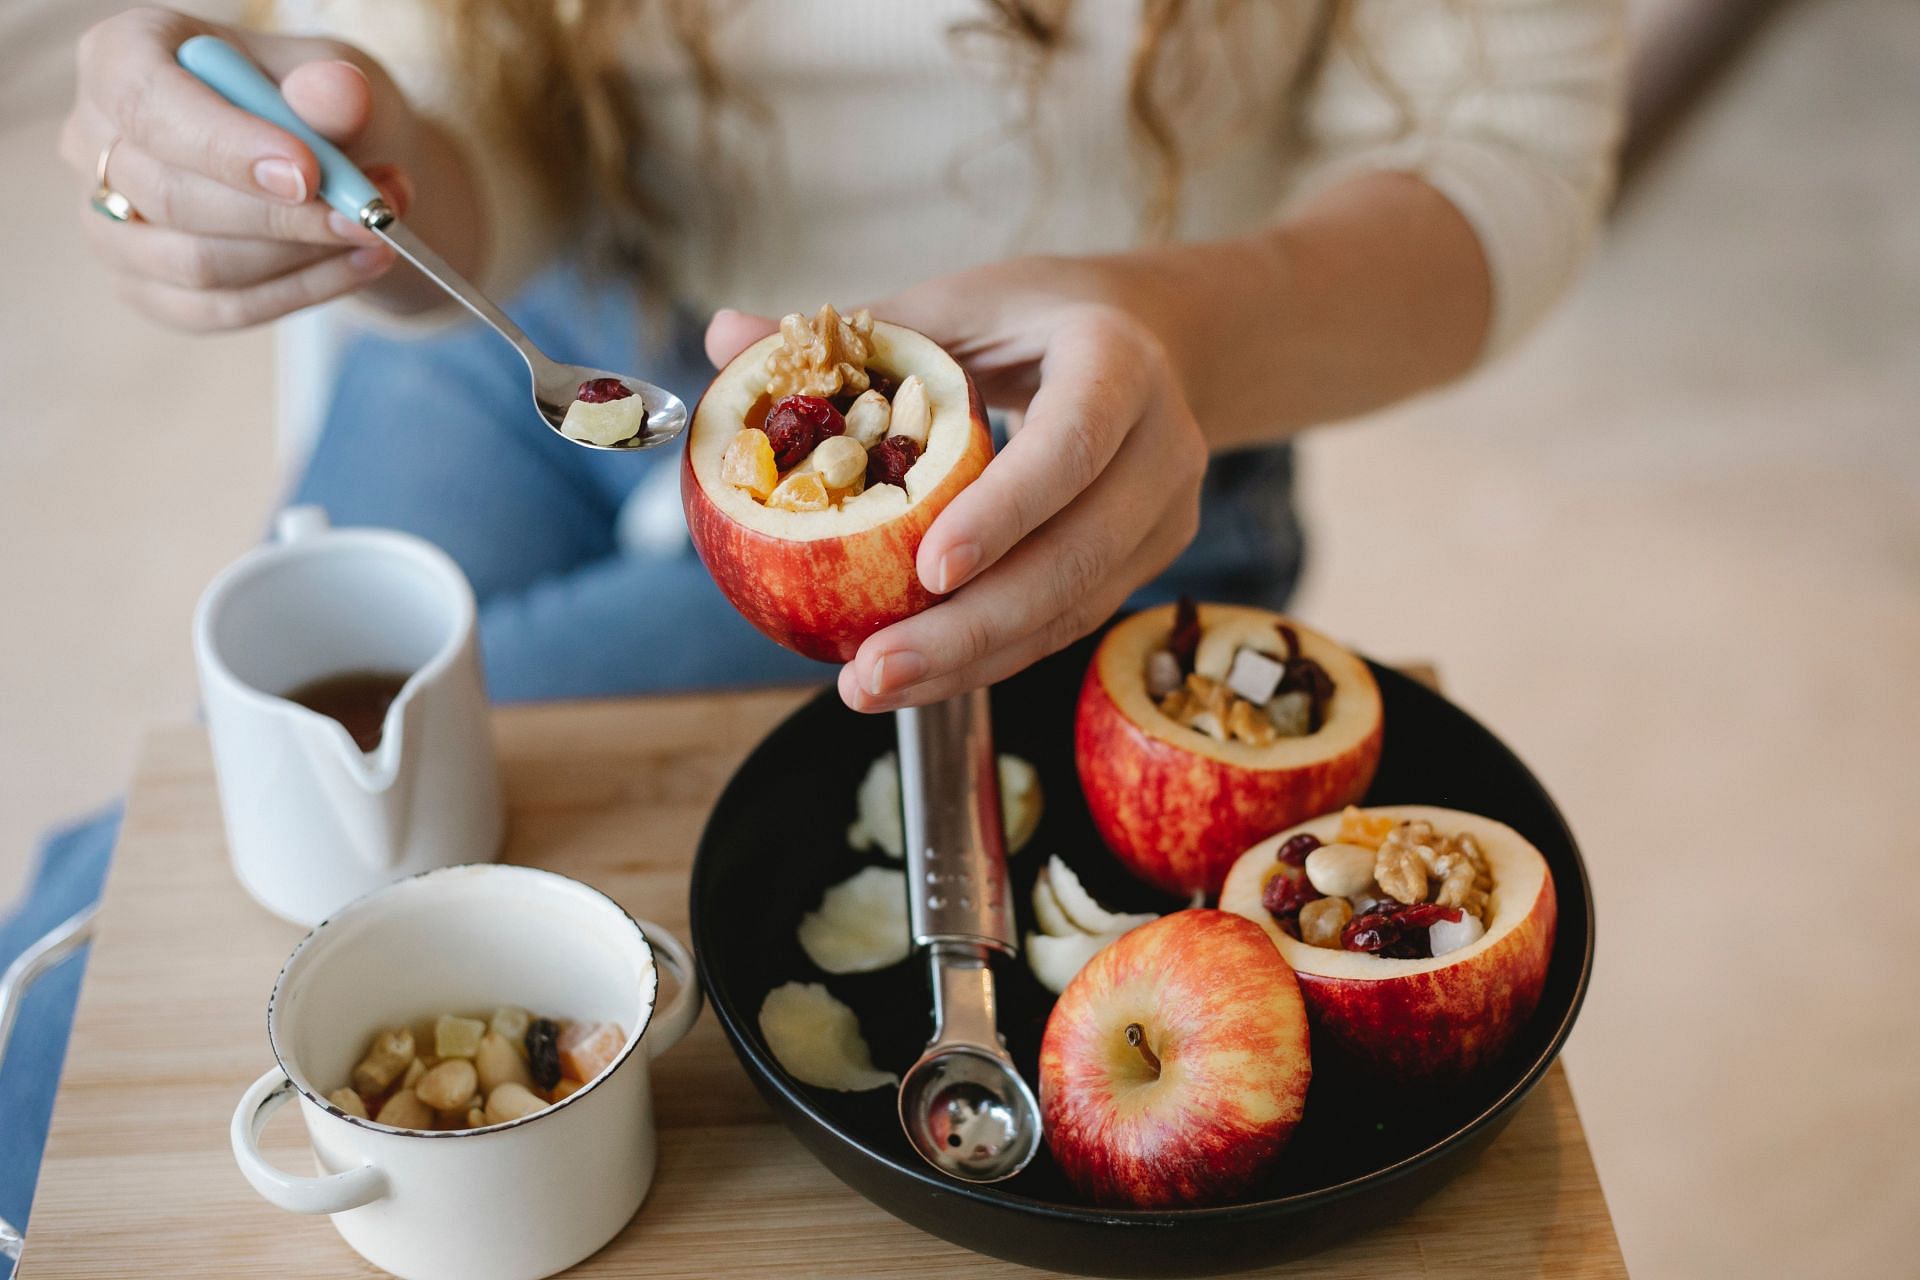 Healthy apple recipes are an excellent way to include apples in your diet. (Image via Pexels/Tim Douglas)